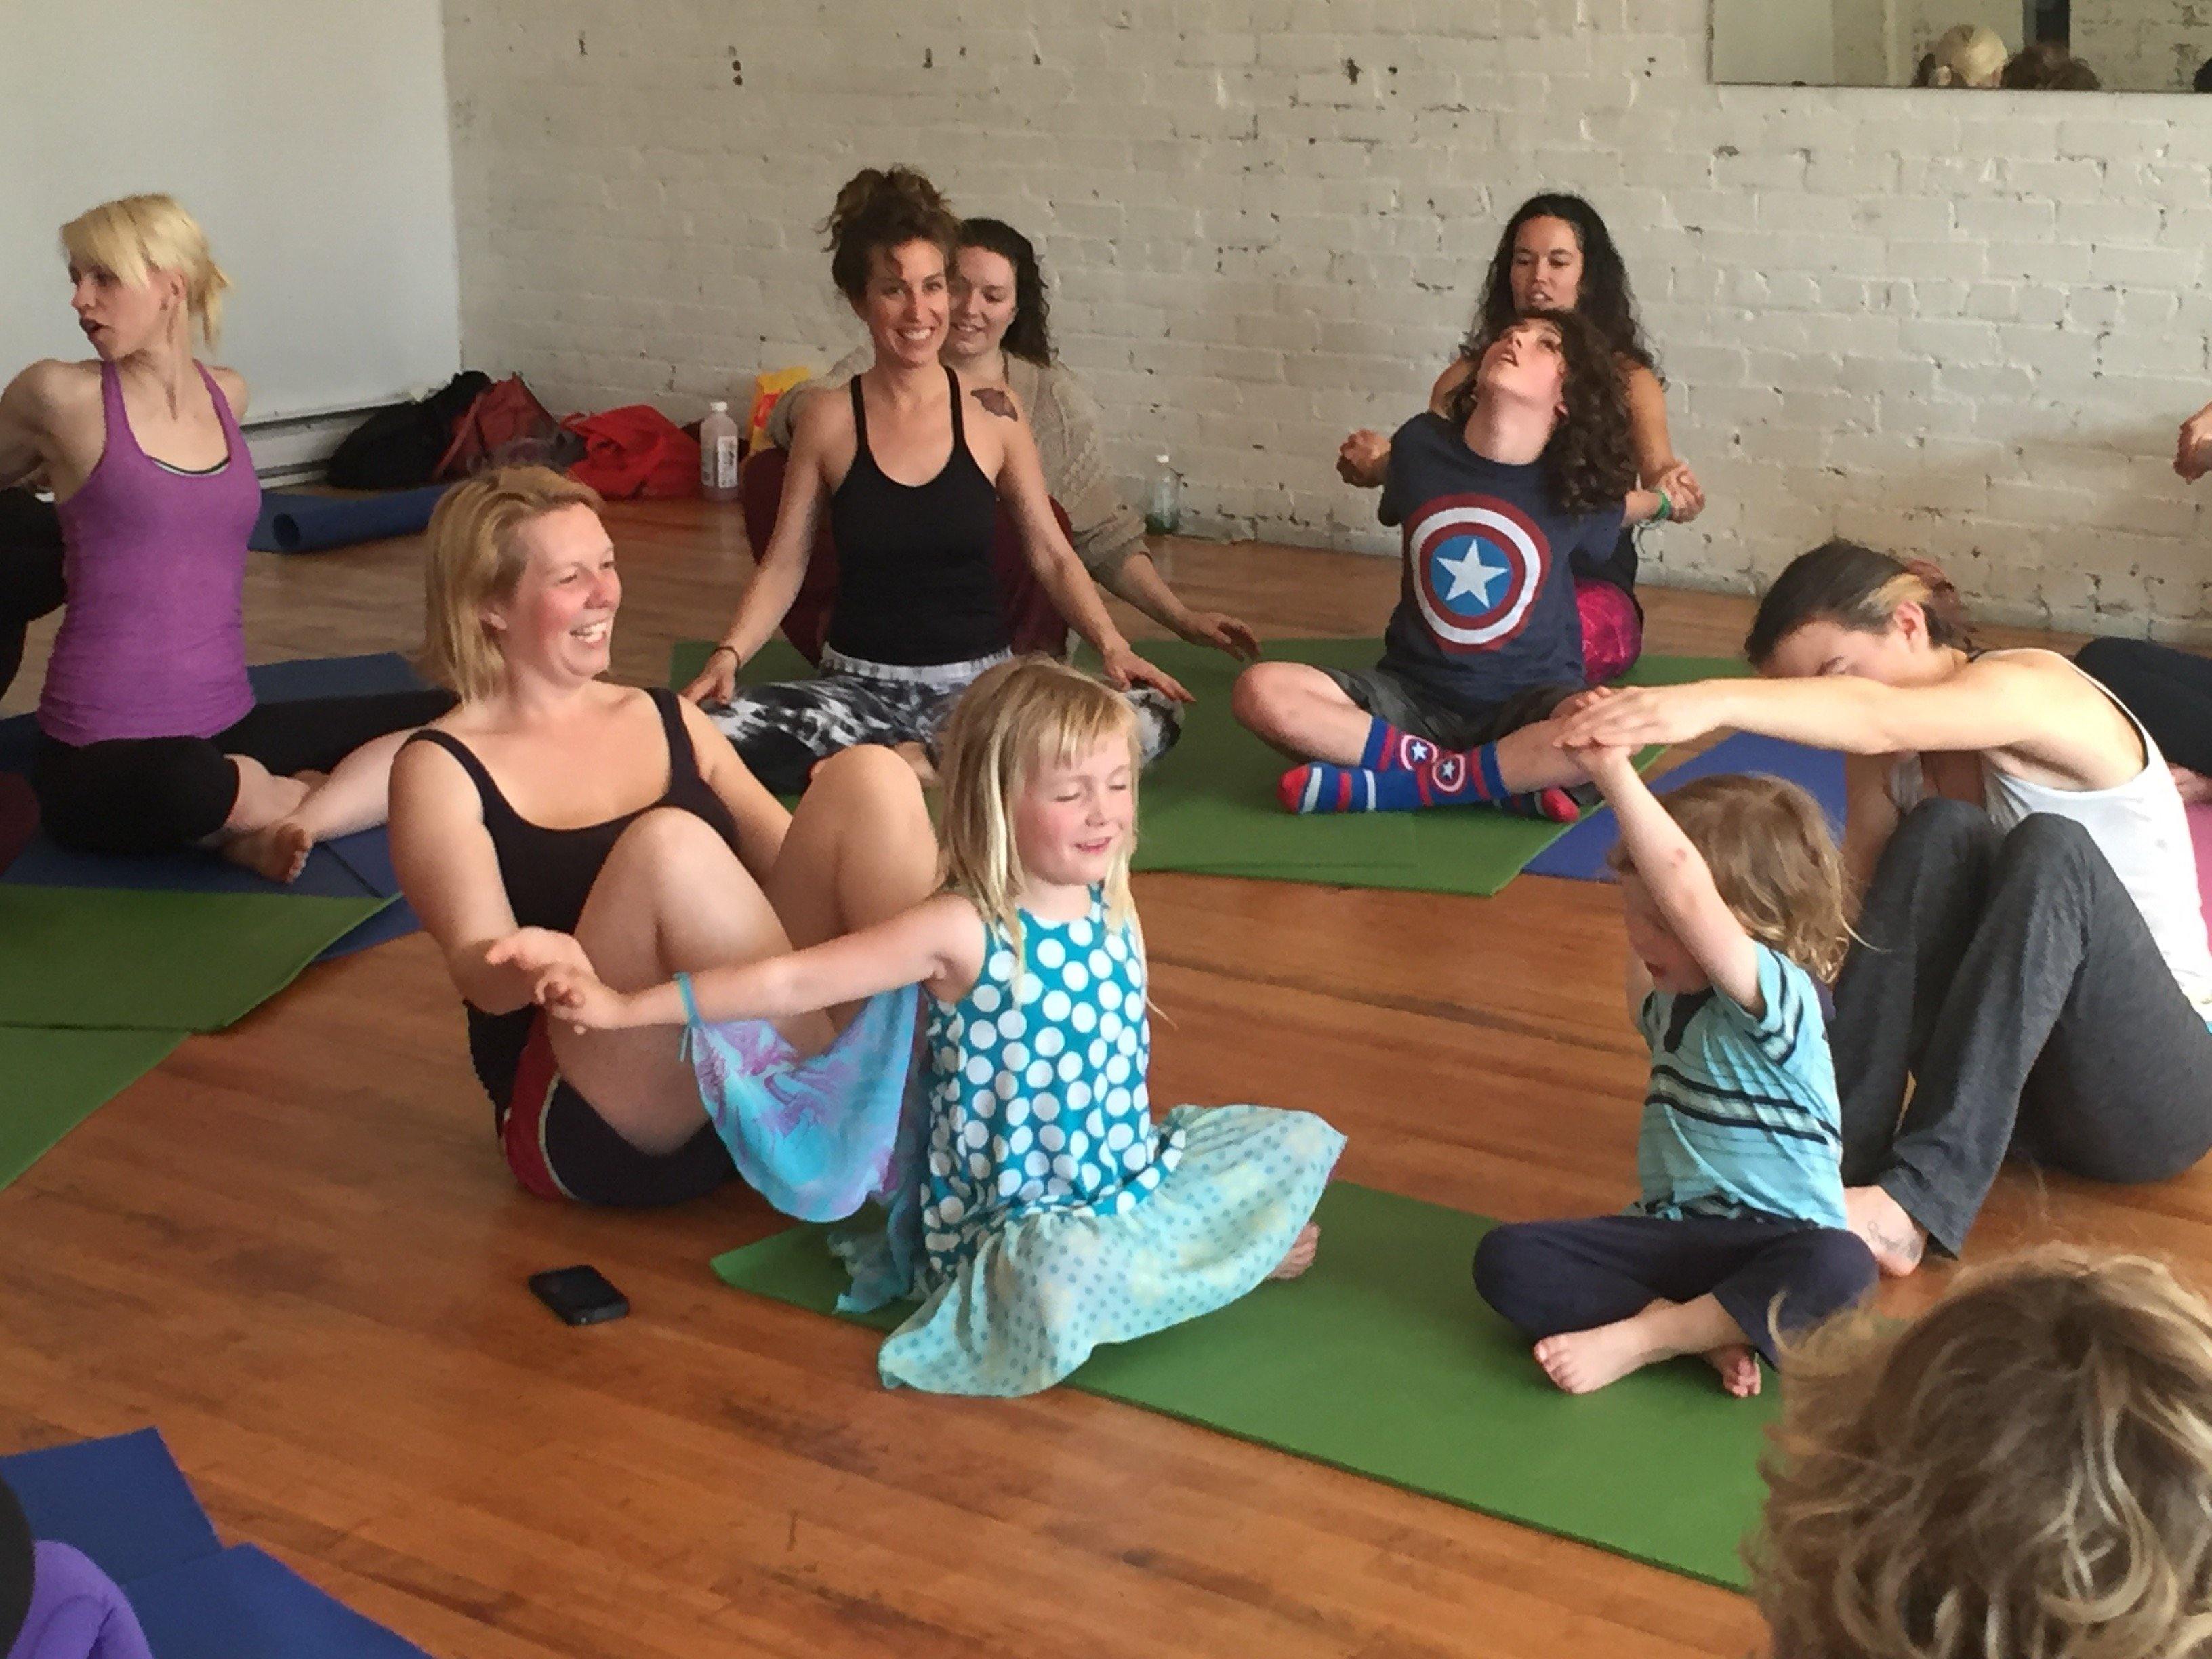 Schoolteachers Xxx - An awesome extraordinary online yoga courses for kids